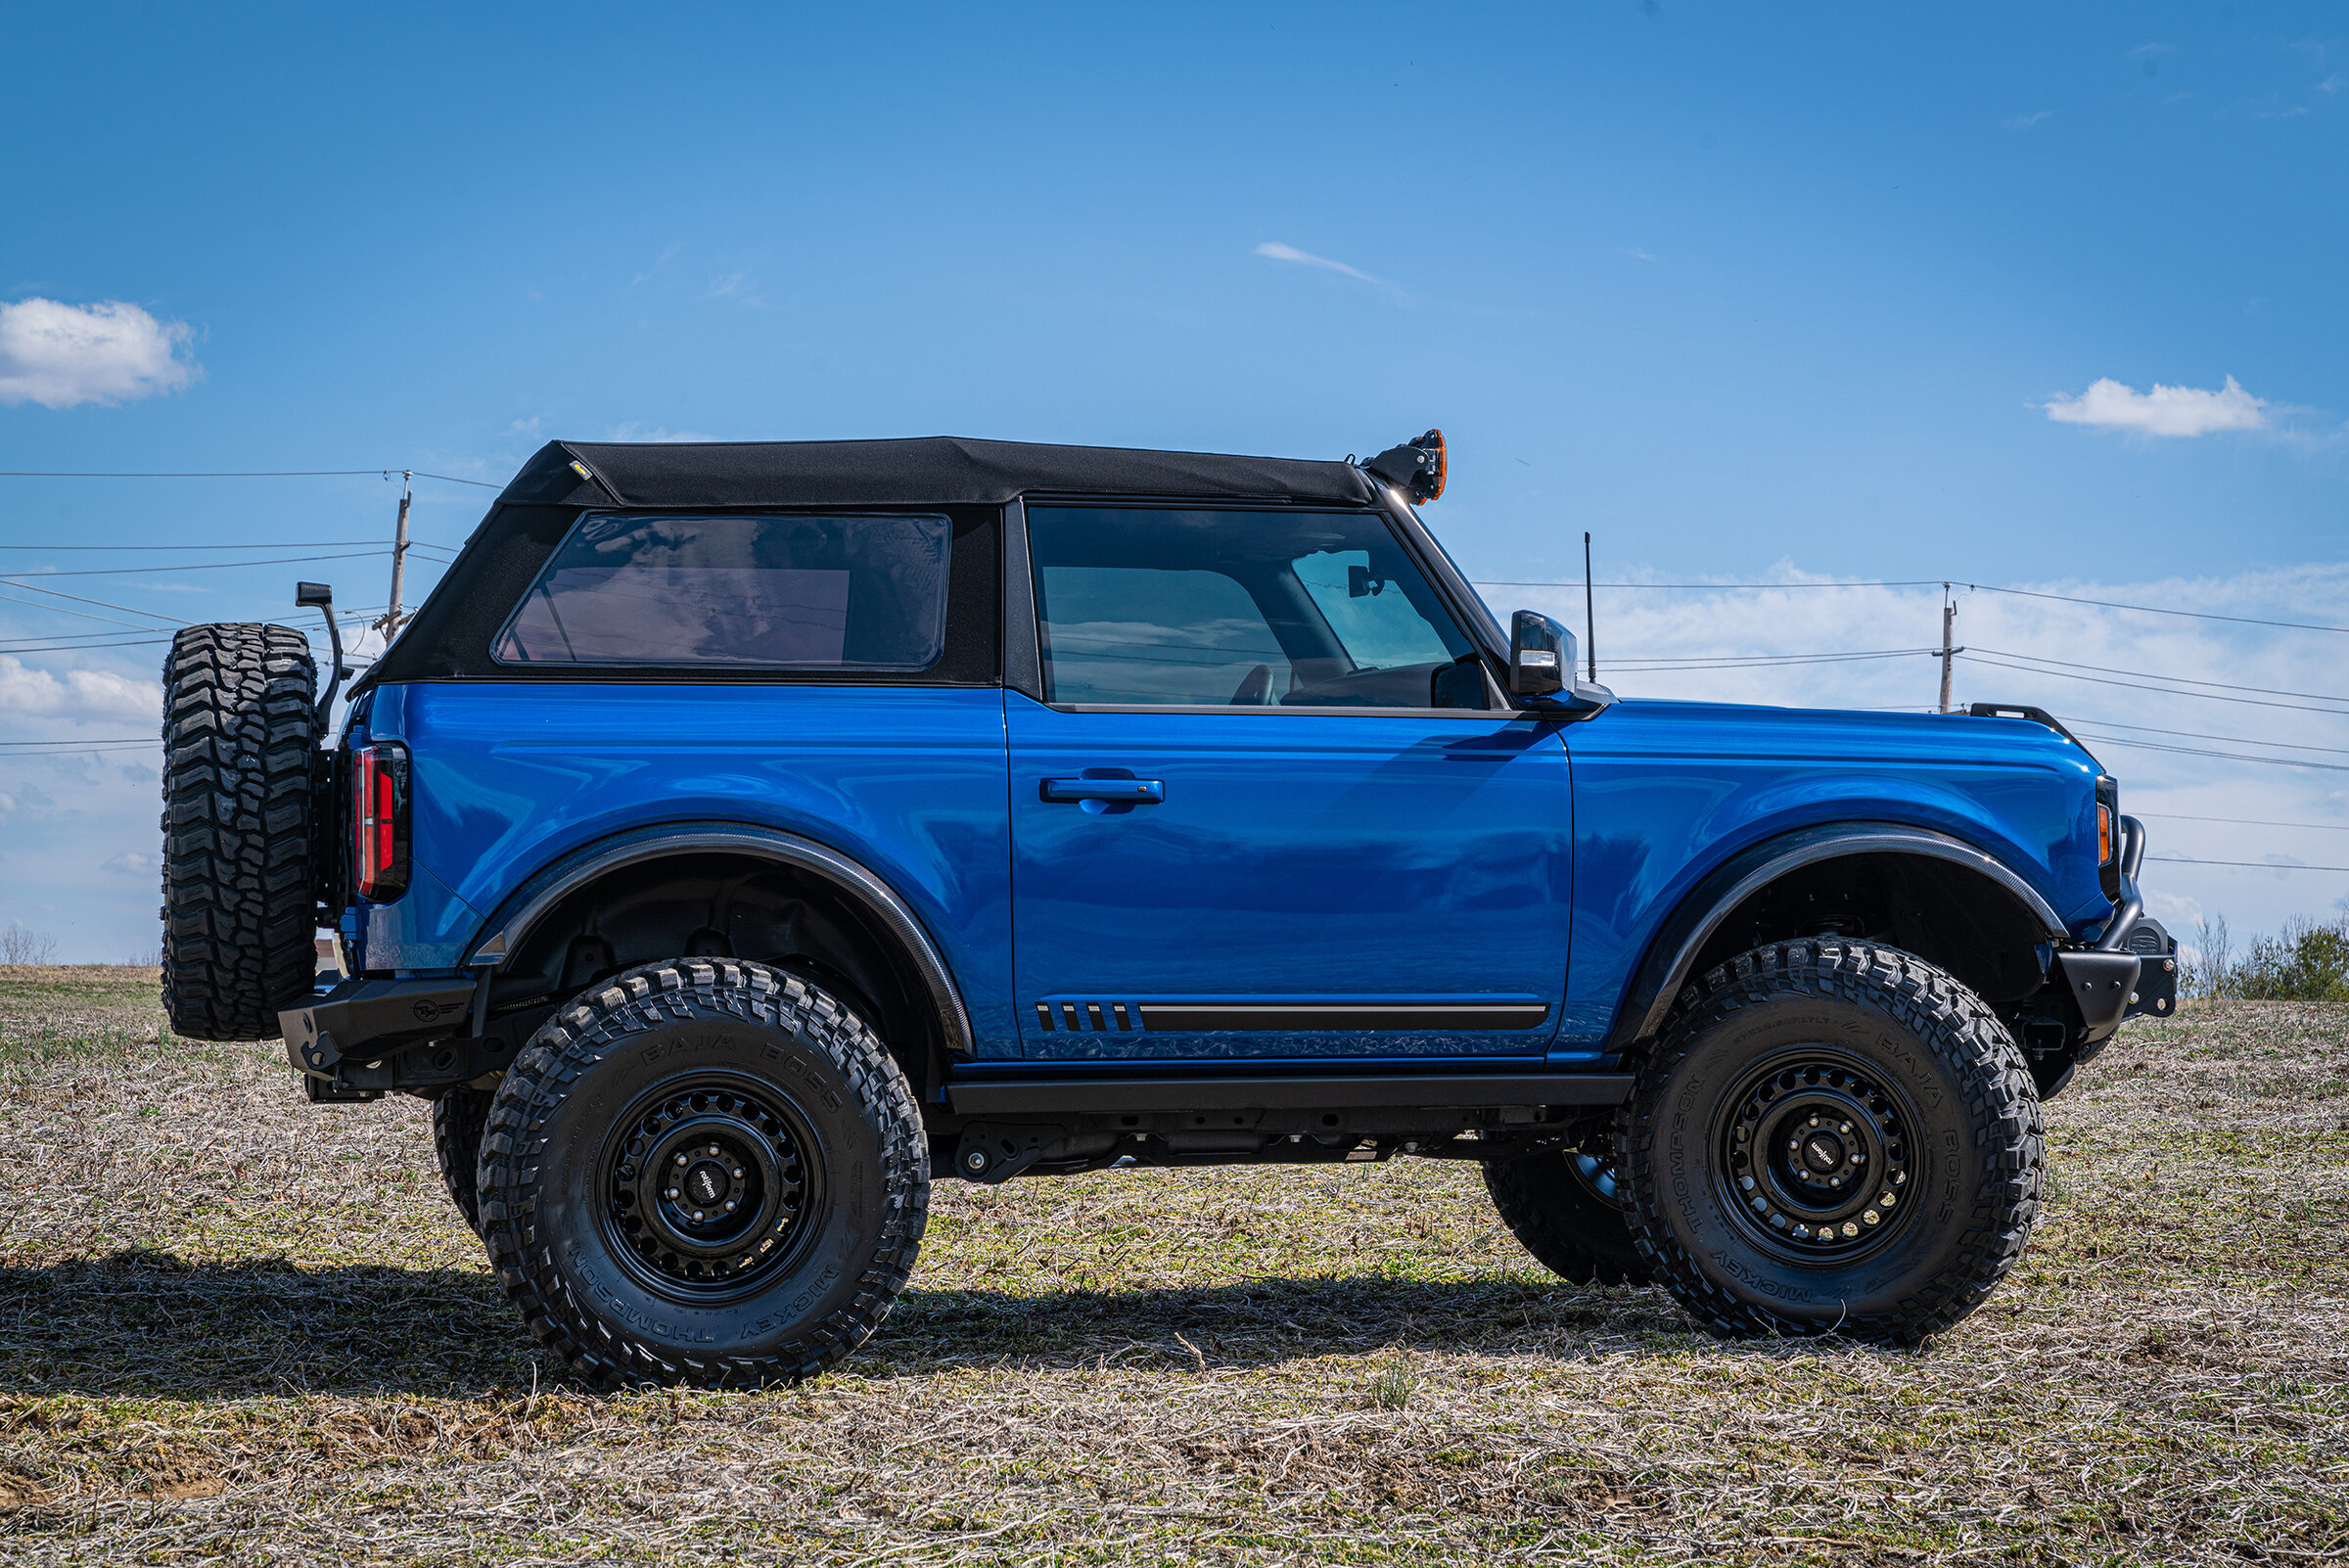 Ford Bronco Lbracket 2 door FE build (UPDATED) on Zone 3" lift and 37's 524BFEBC-0D0A-4454-9A79-C7B44999679B